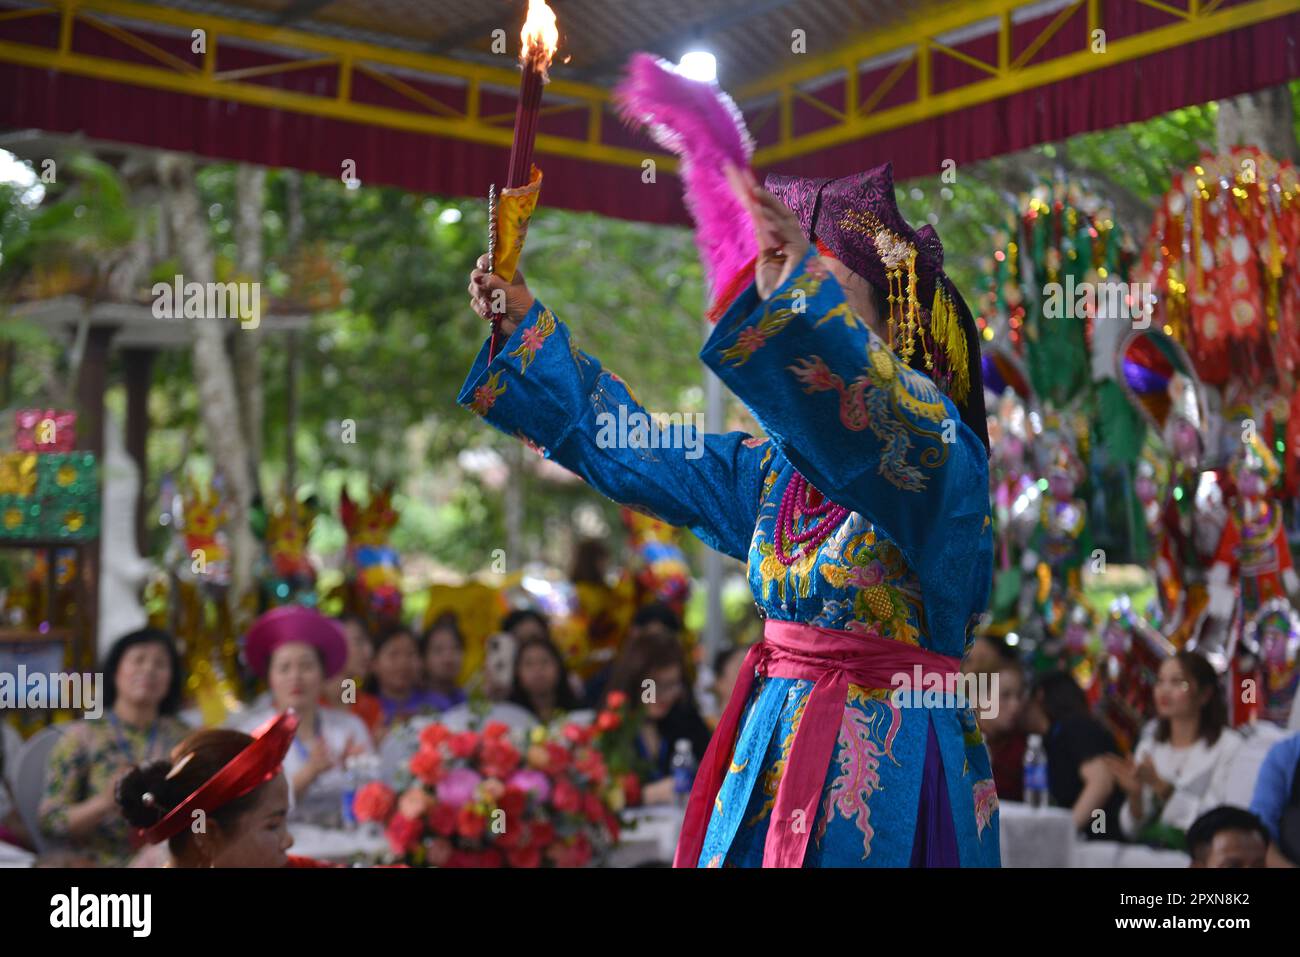 Shaman plays the role of a god performing rituals to transmit messages in Mother Goddess Worship event. North Vietnam. hầu đồng. 越南旅游, 베트남 관광, ベトナム観光 Stock Photo